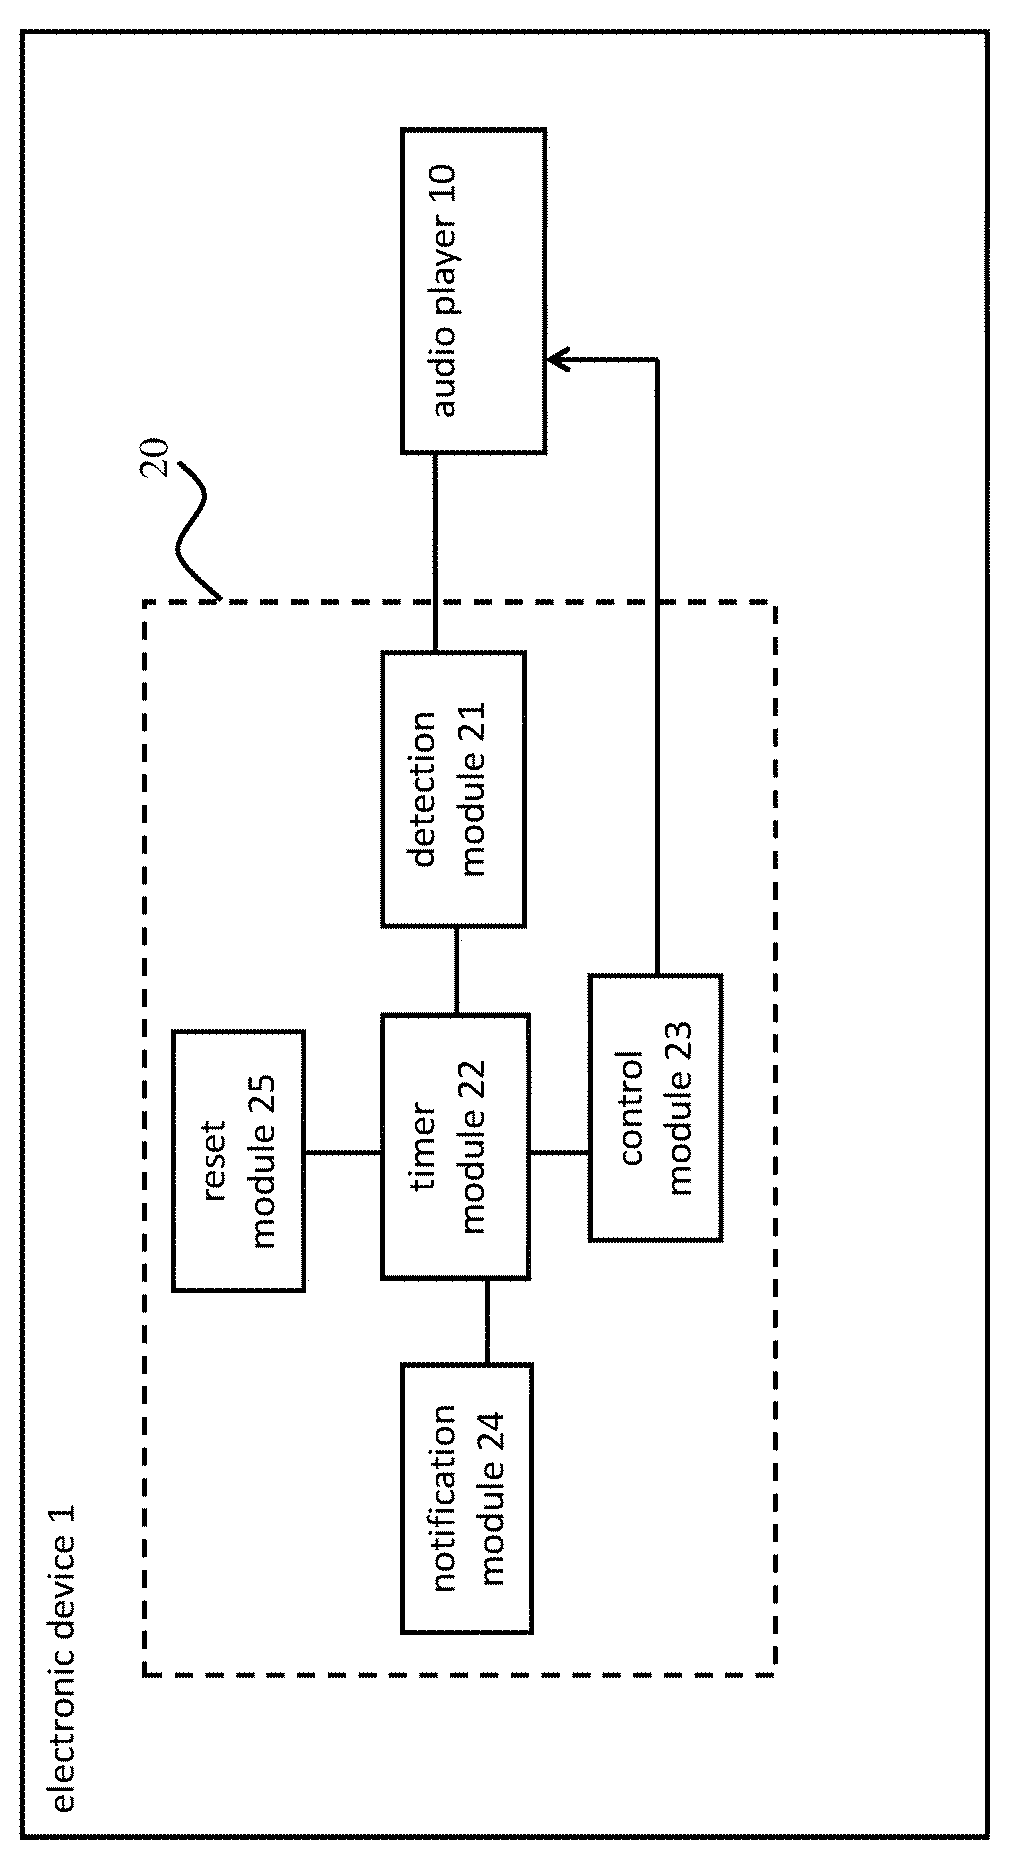 Electronic device capable of automatically adjusting an output volume